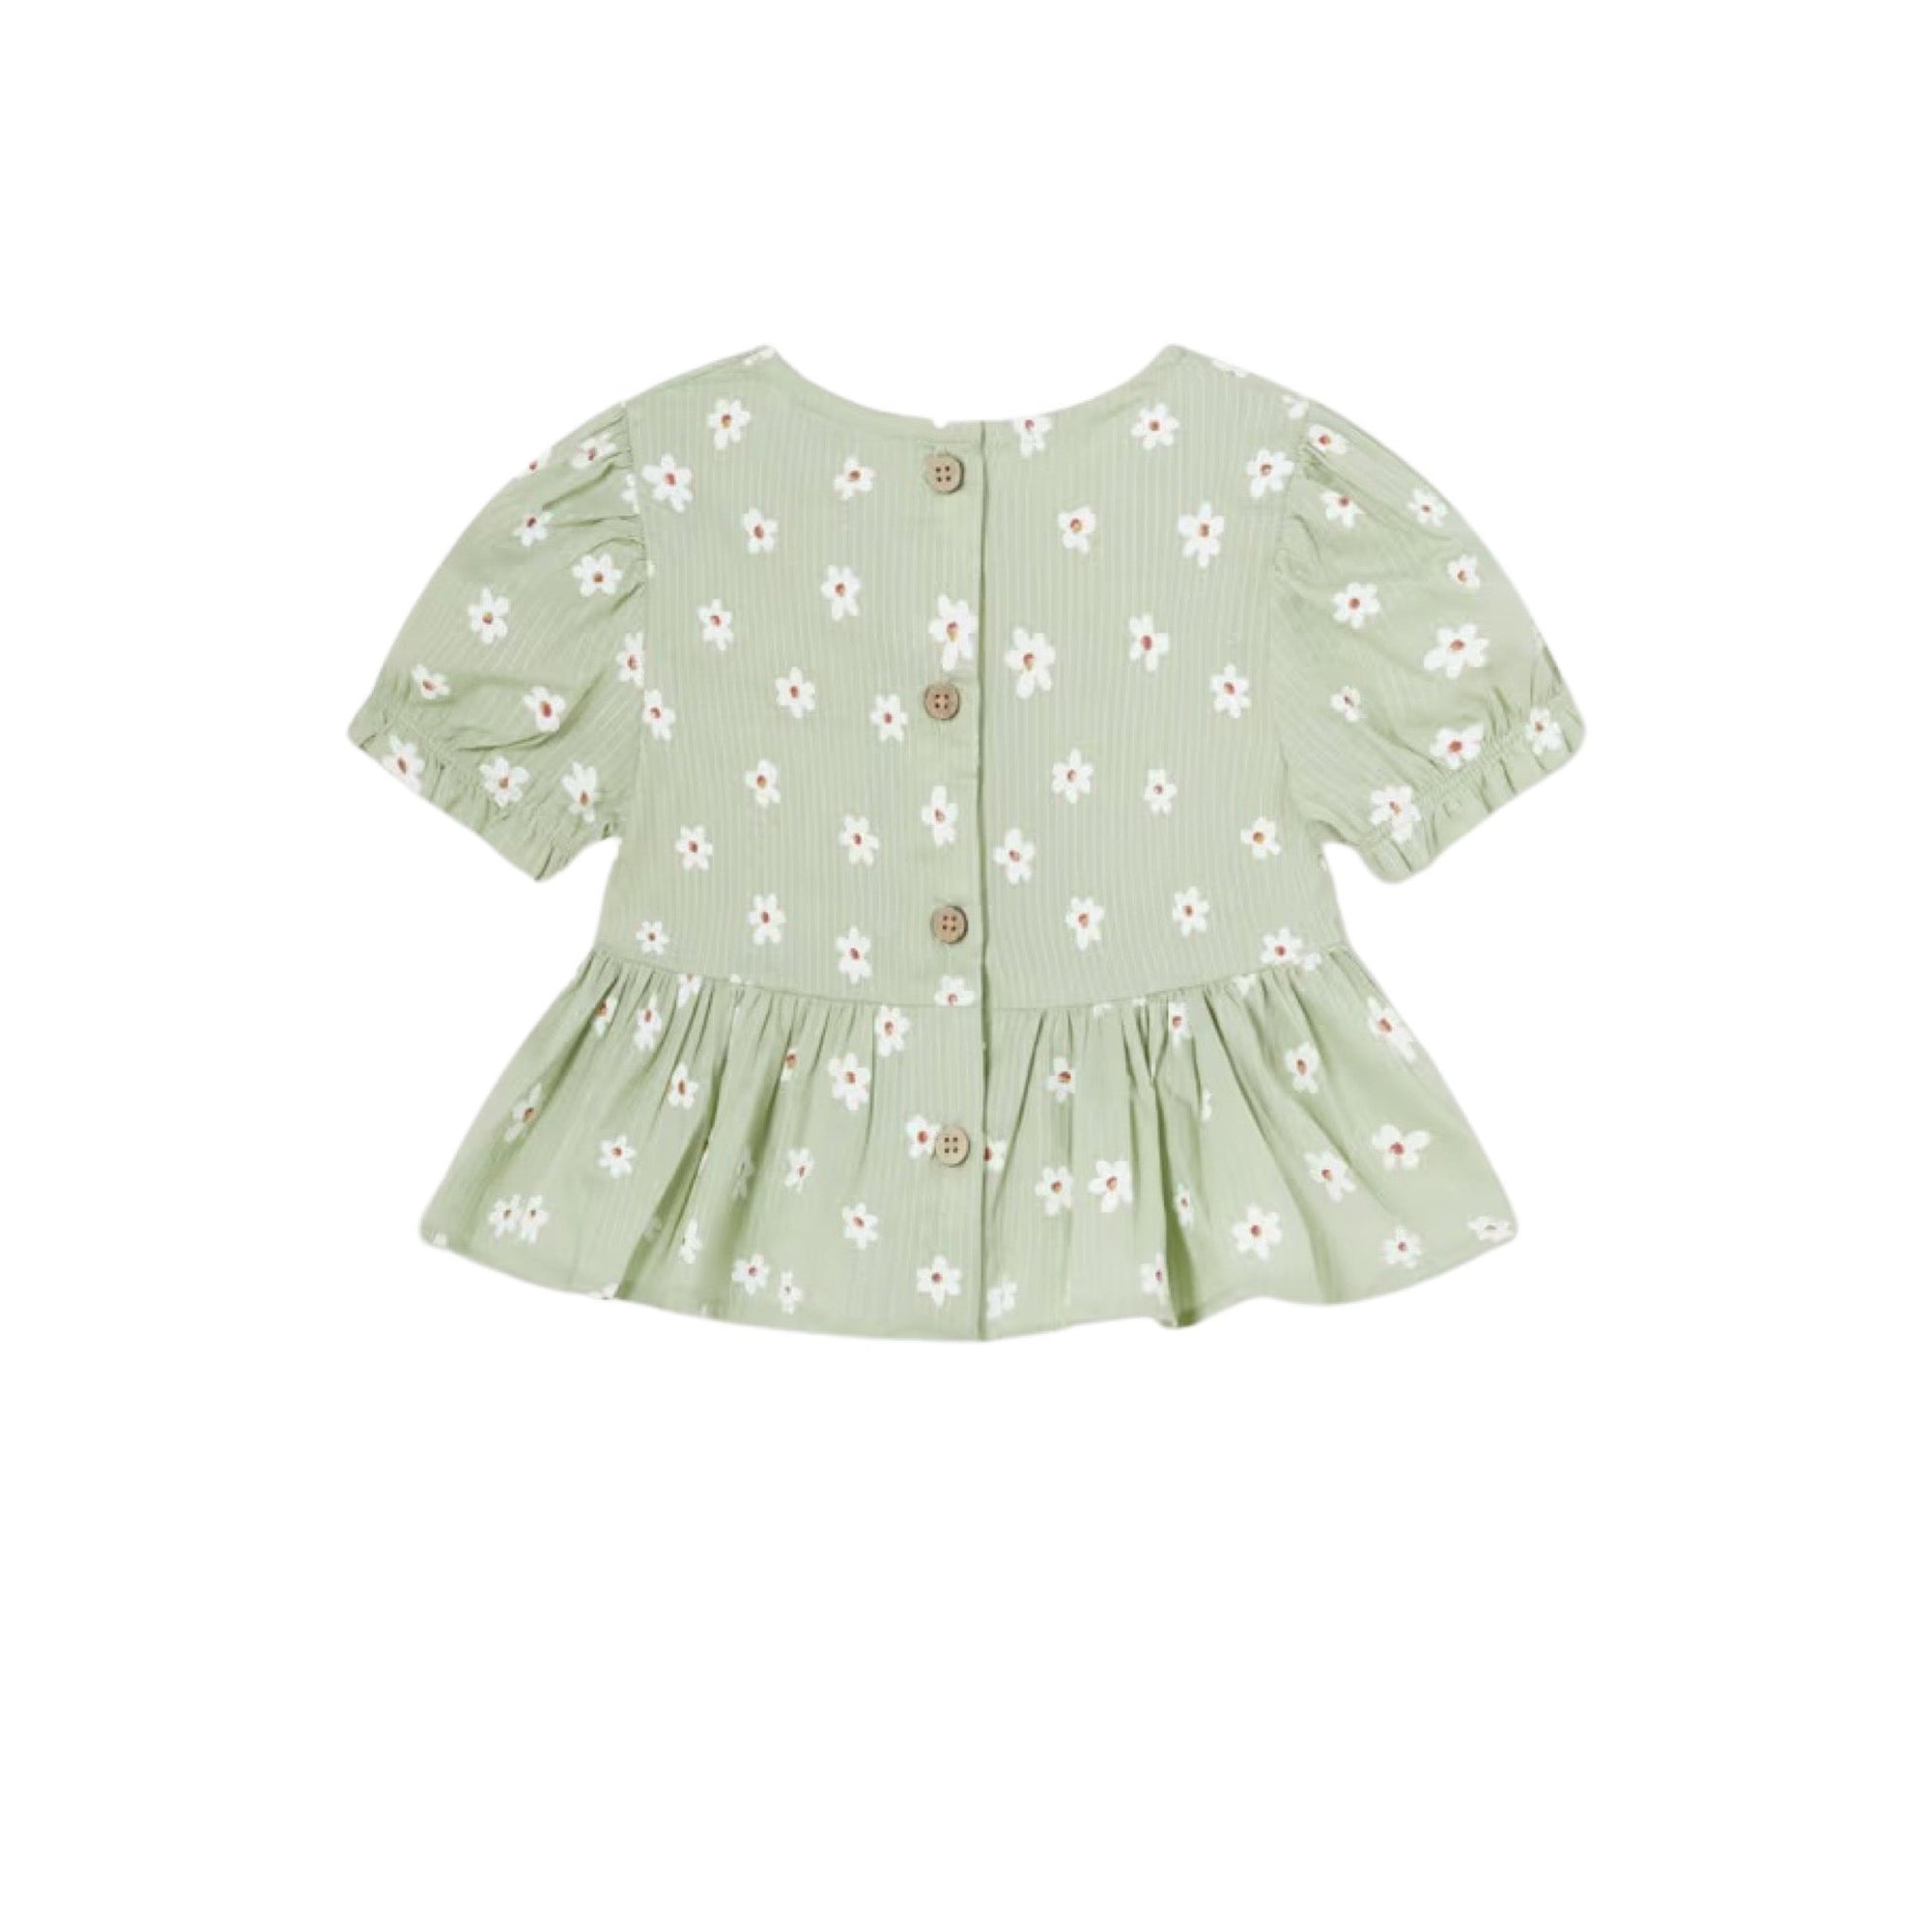 Baby Sage Top with Bow & White Daisy Print